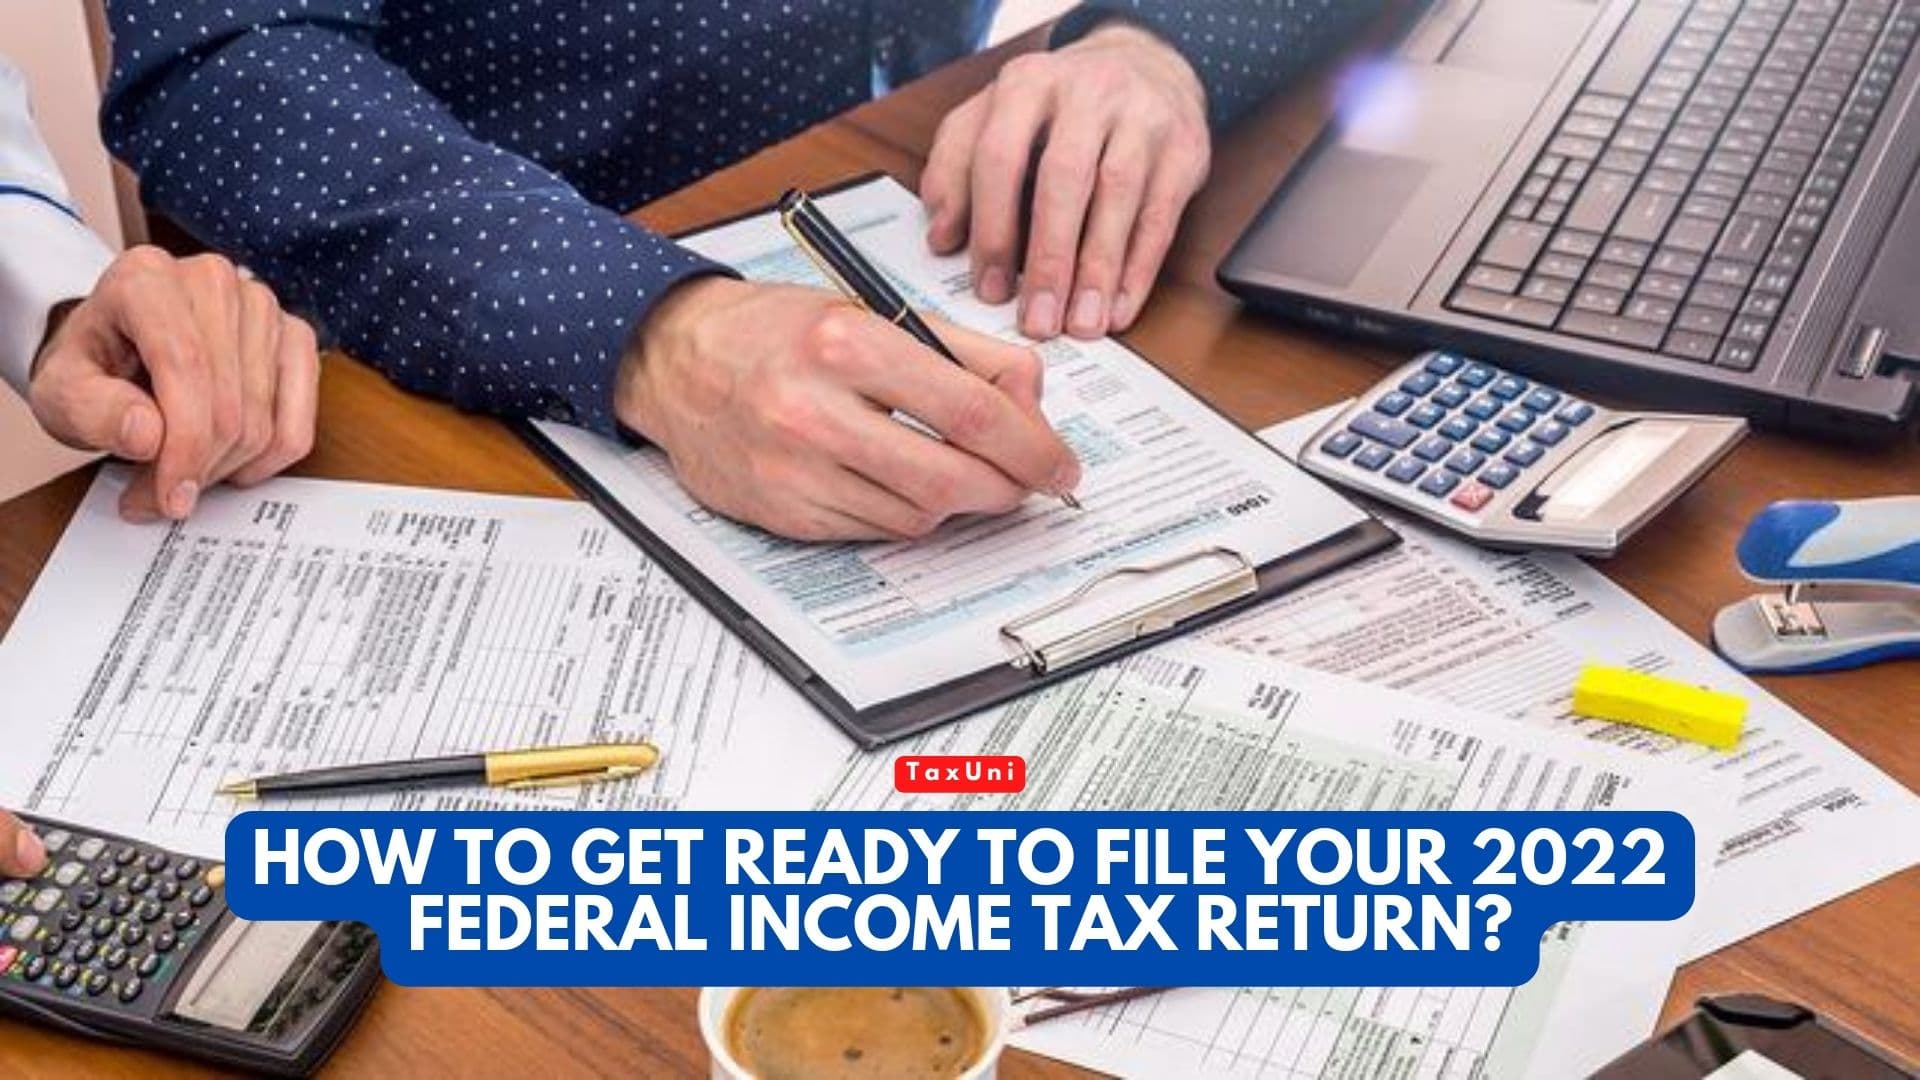 How-to-Get-Ready-to-File-Your-2022-Federal-Income-Tax-Return-TaxUni-Cover-1